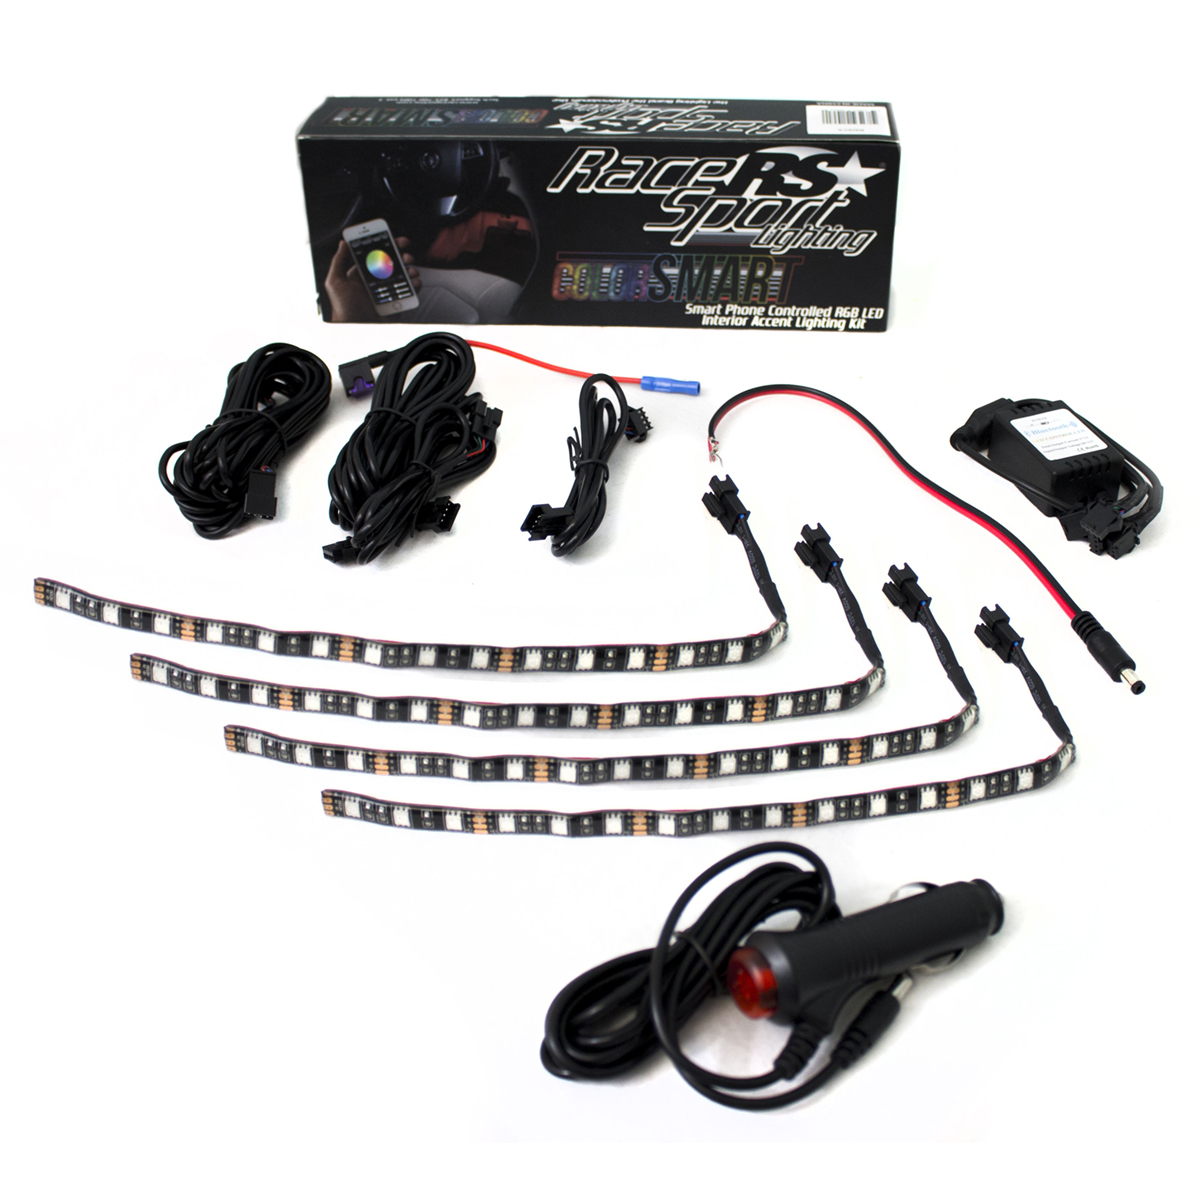 Racesport -  LED Interior RGB Multi-Color Accent Kit ColorSMART Smartphone Controlled with millions 